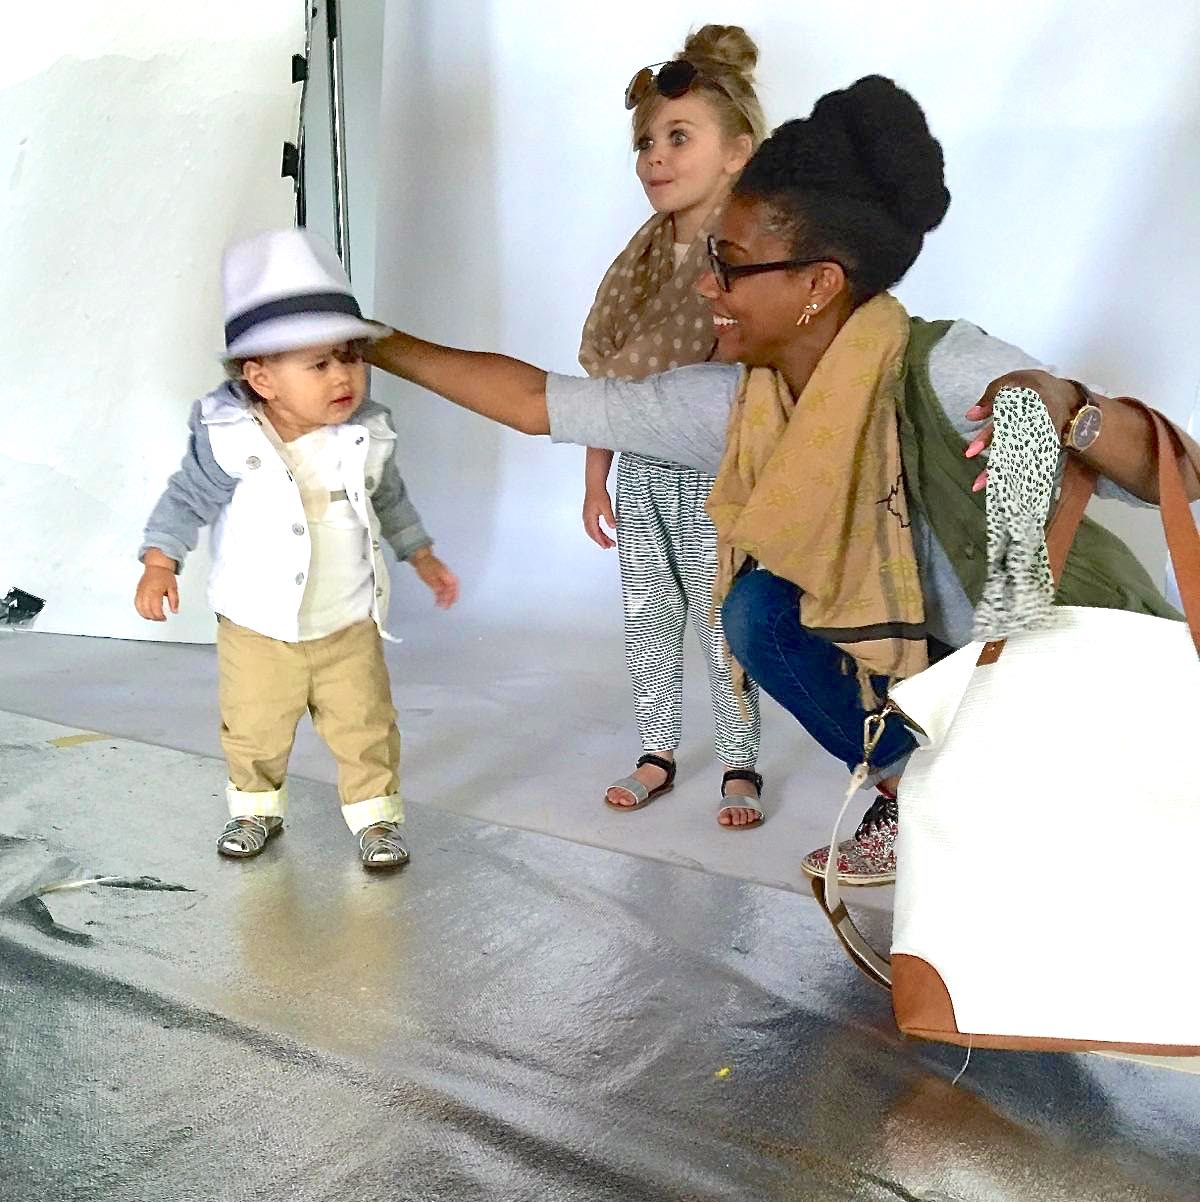 Dressing our mini models on set. They were so cute!